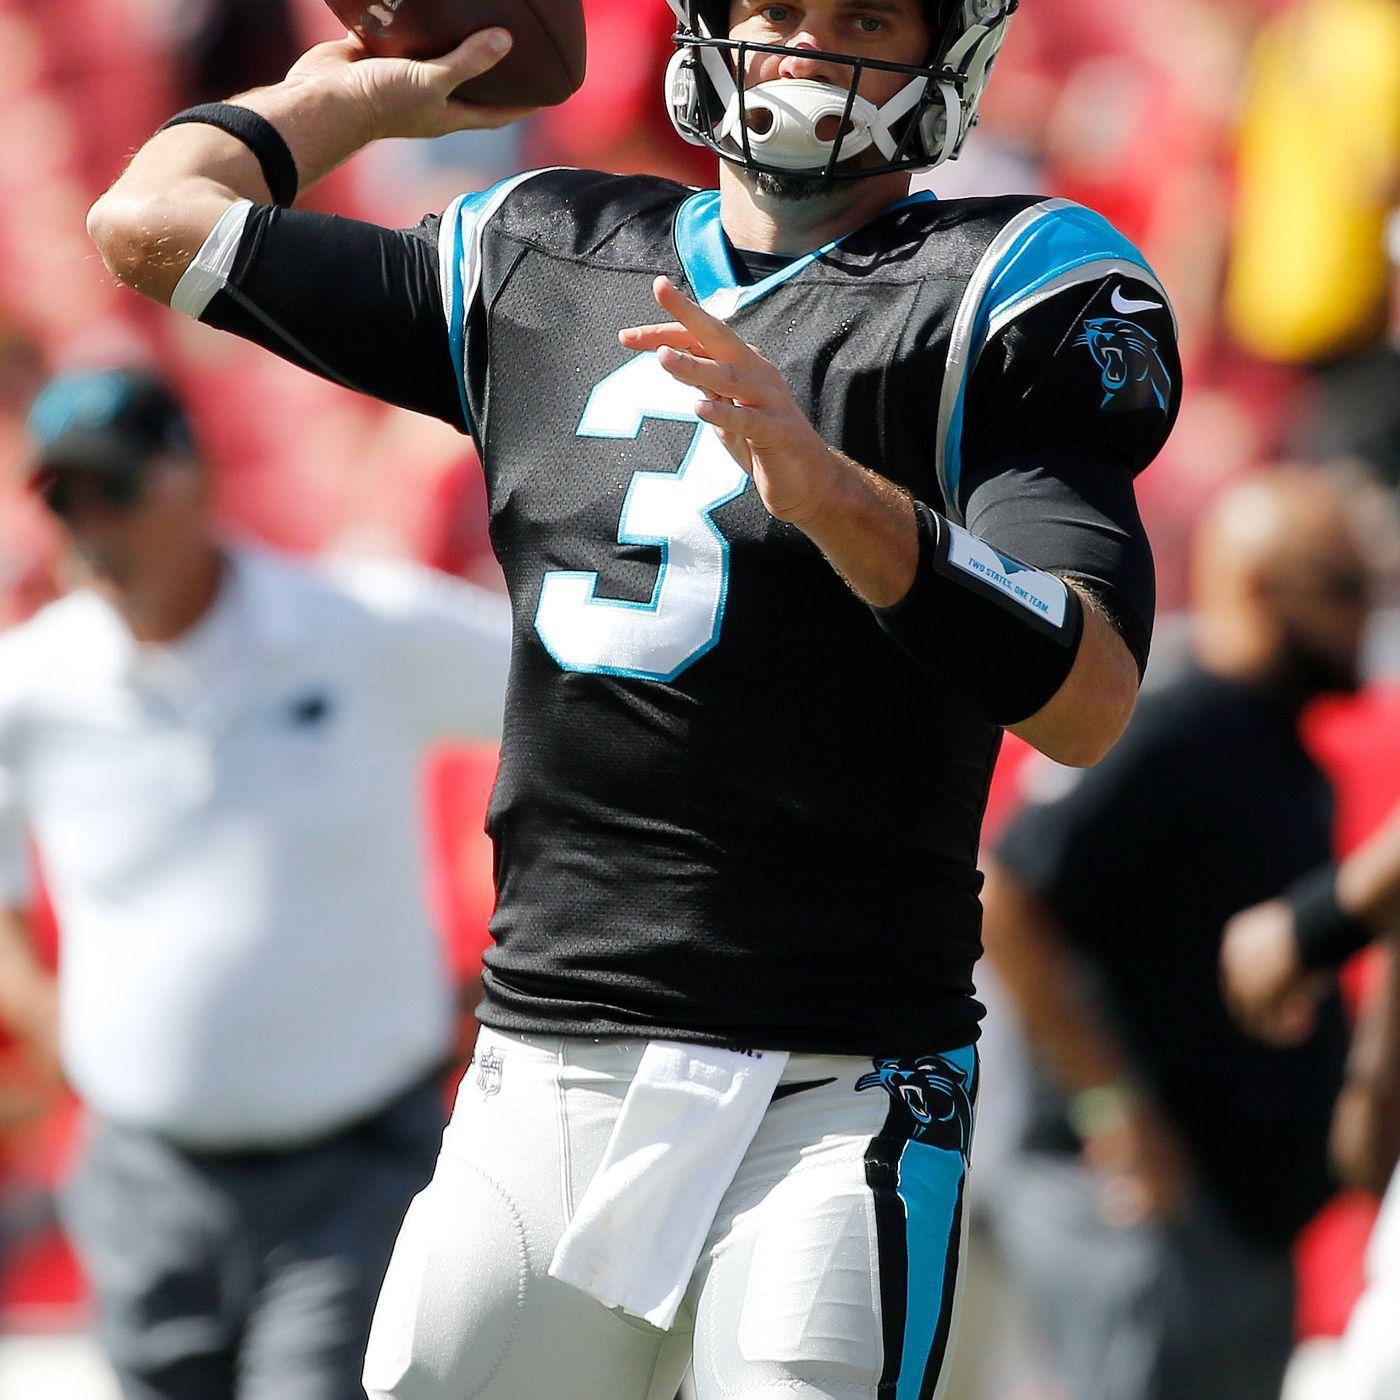 Derek Anderson not likely to return to Carolina Panthers in 2018